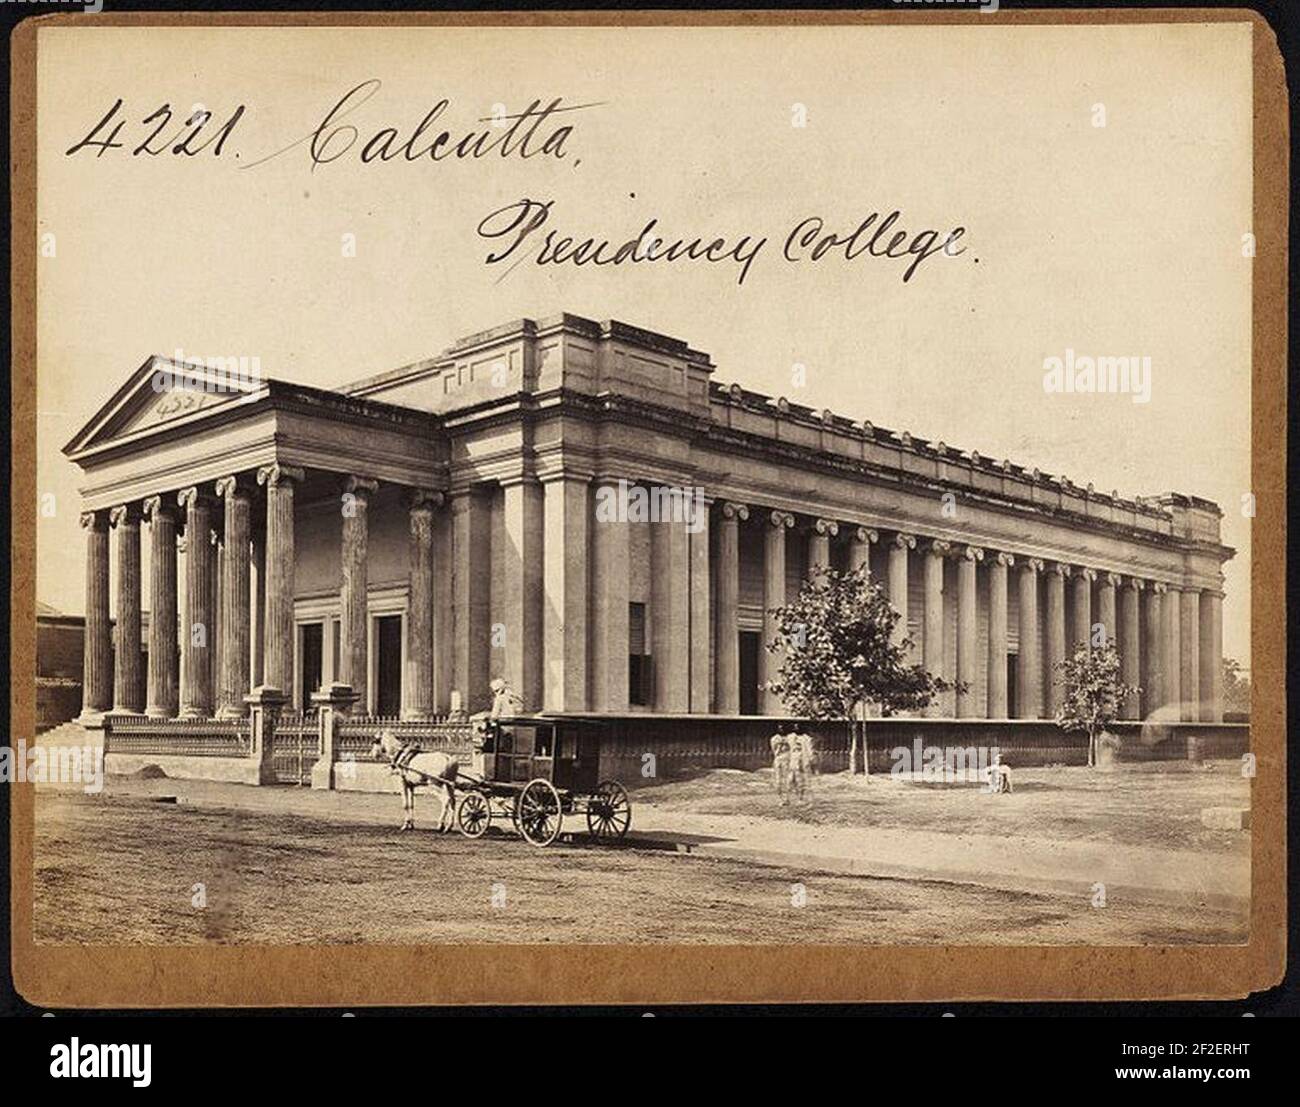 Presidency College, Calcutta by Francis Frith (2). Stock Photo